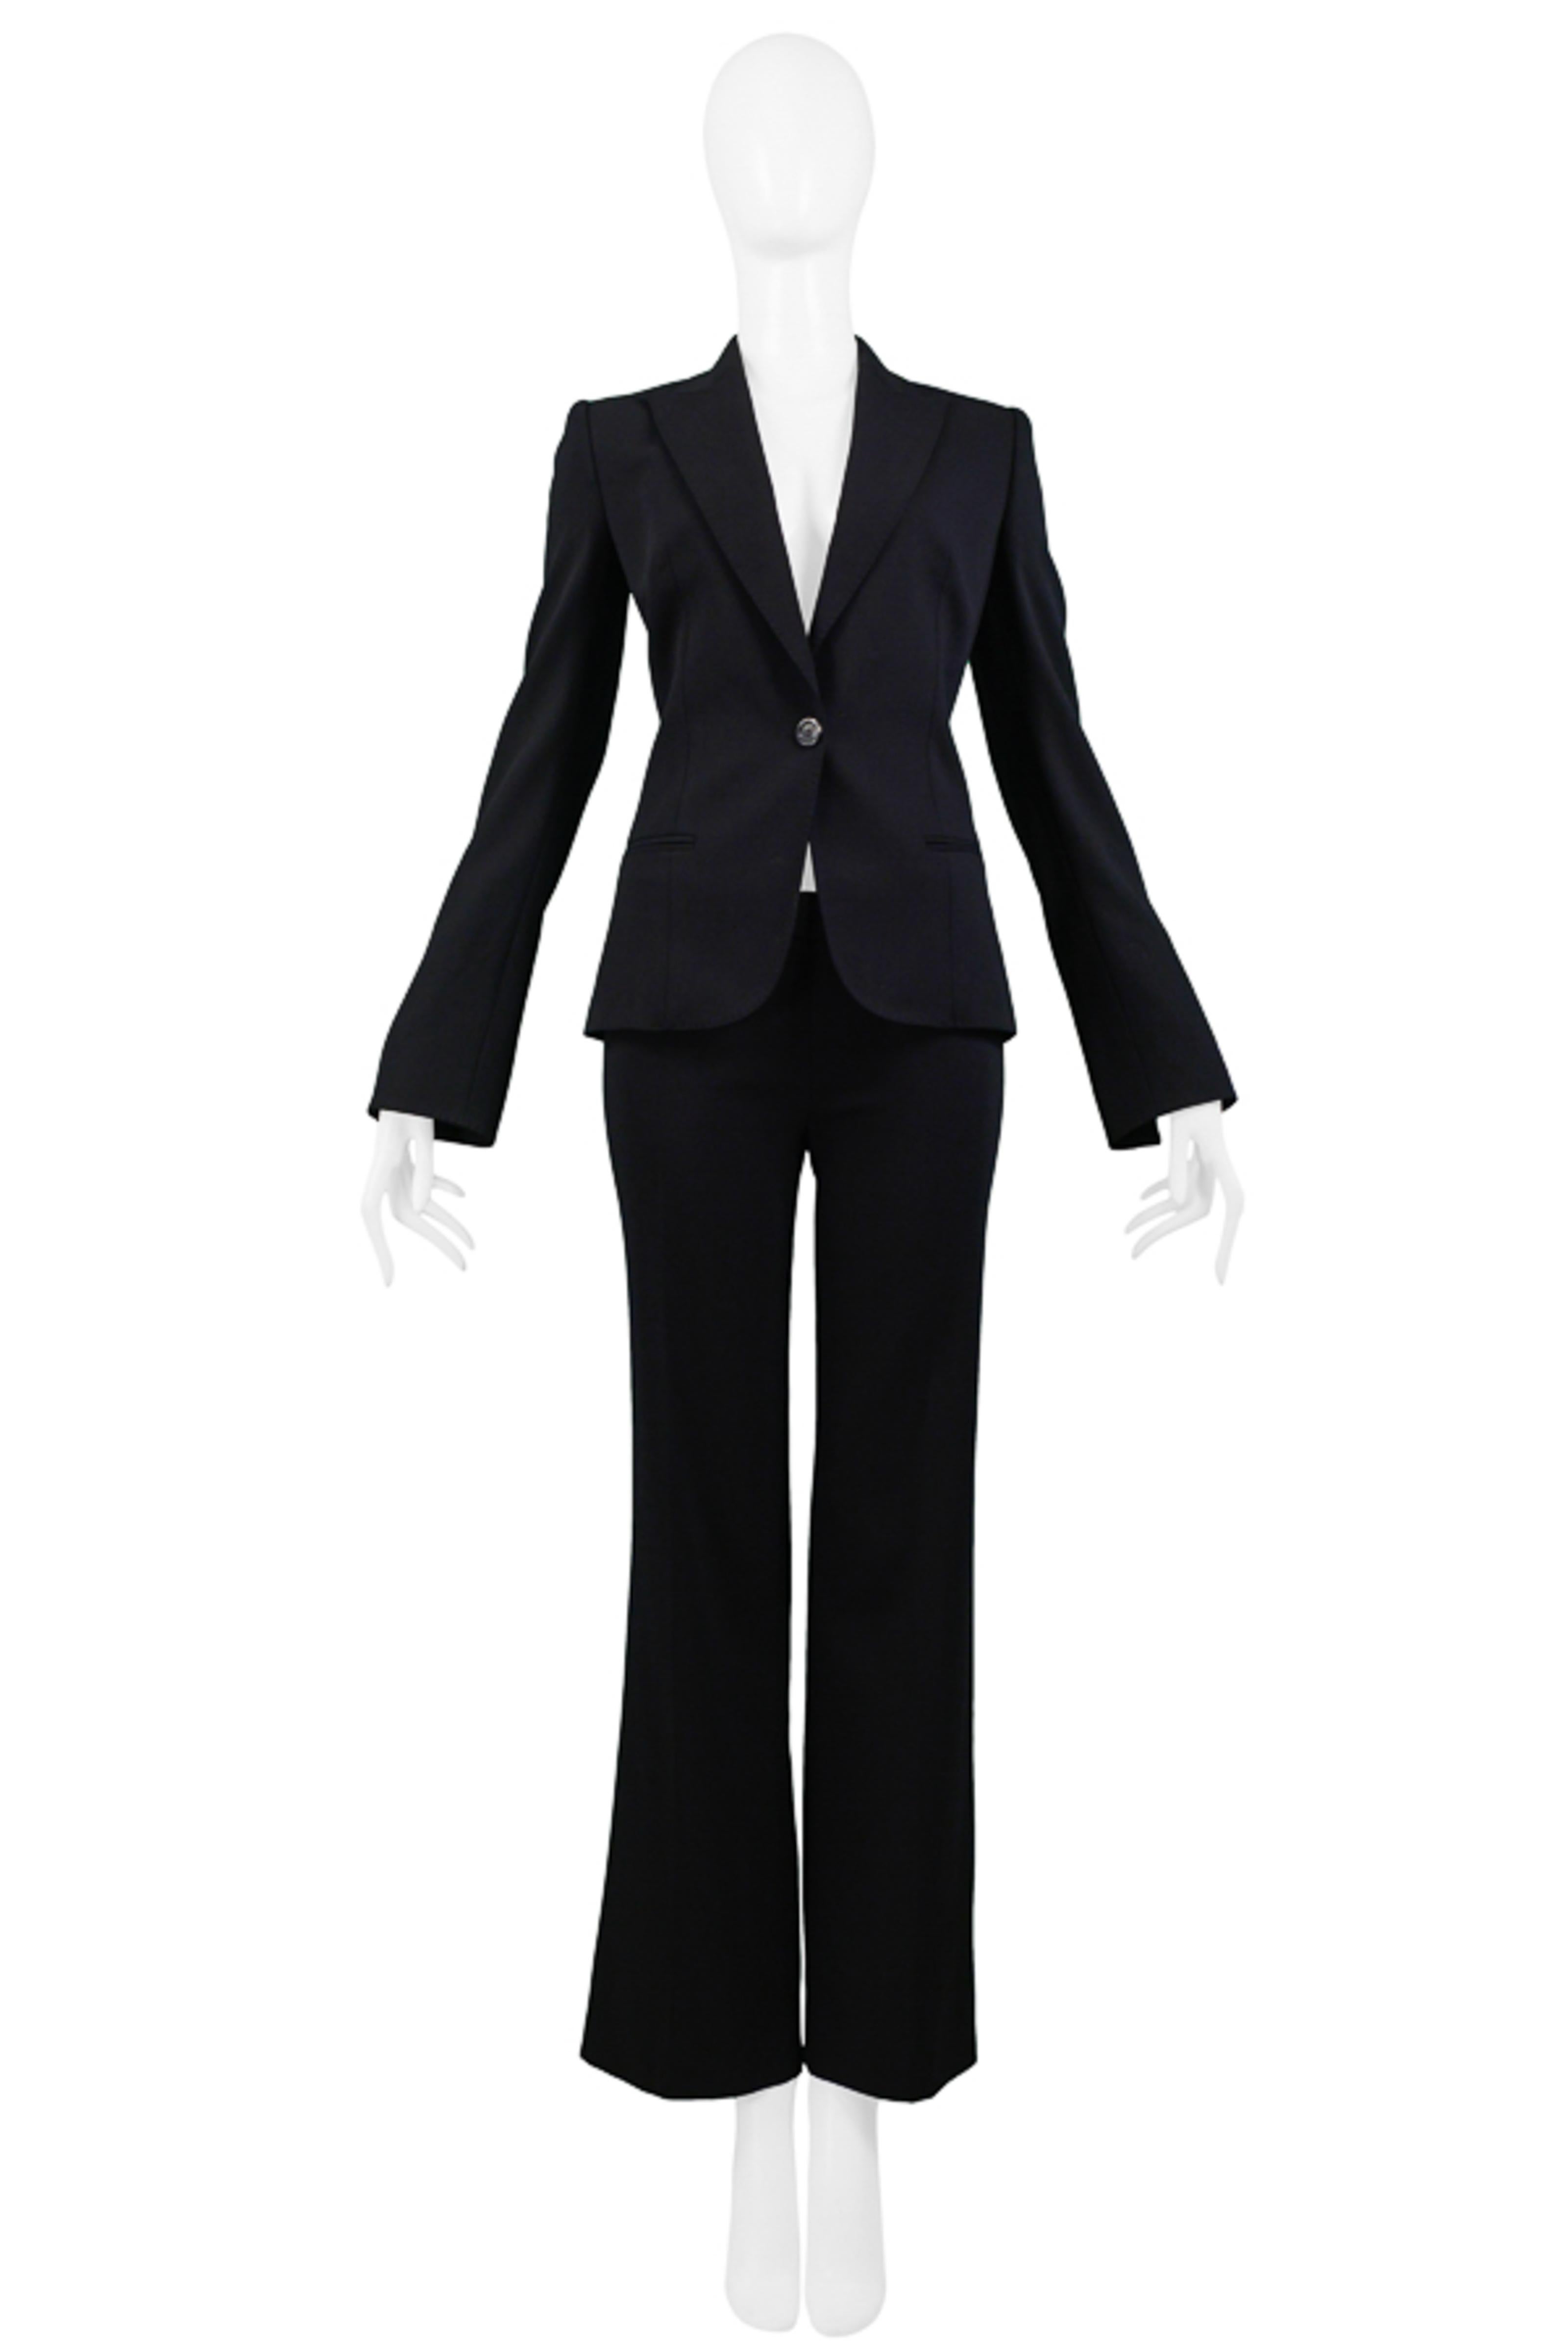 Resurrection Vintage is excited to offer a vintage Gianfranco Ferre classic black wool suit featuring a fitted one-button blazer, notch collar, sharp lapel, slit pockets, and slits at the cuff with exposed logo trim tape. The matching boot cut pants